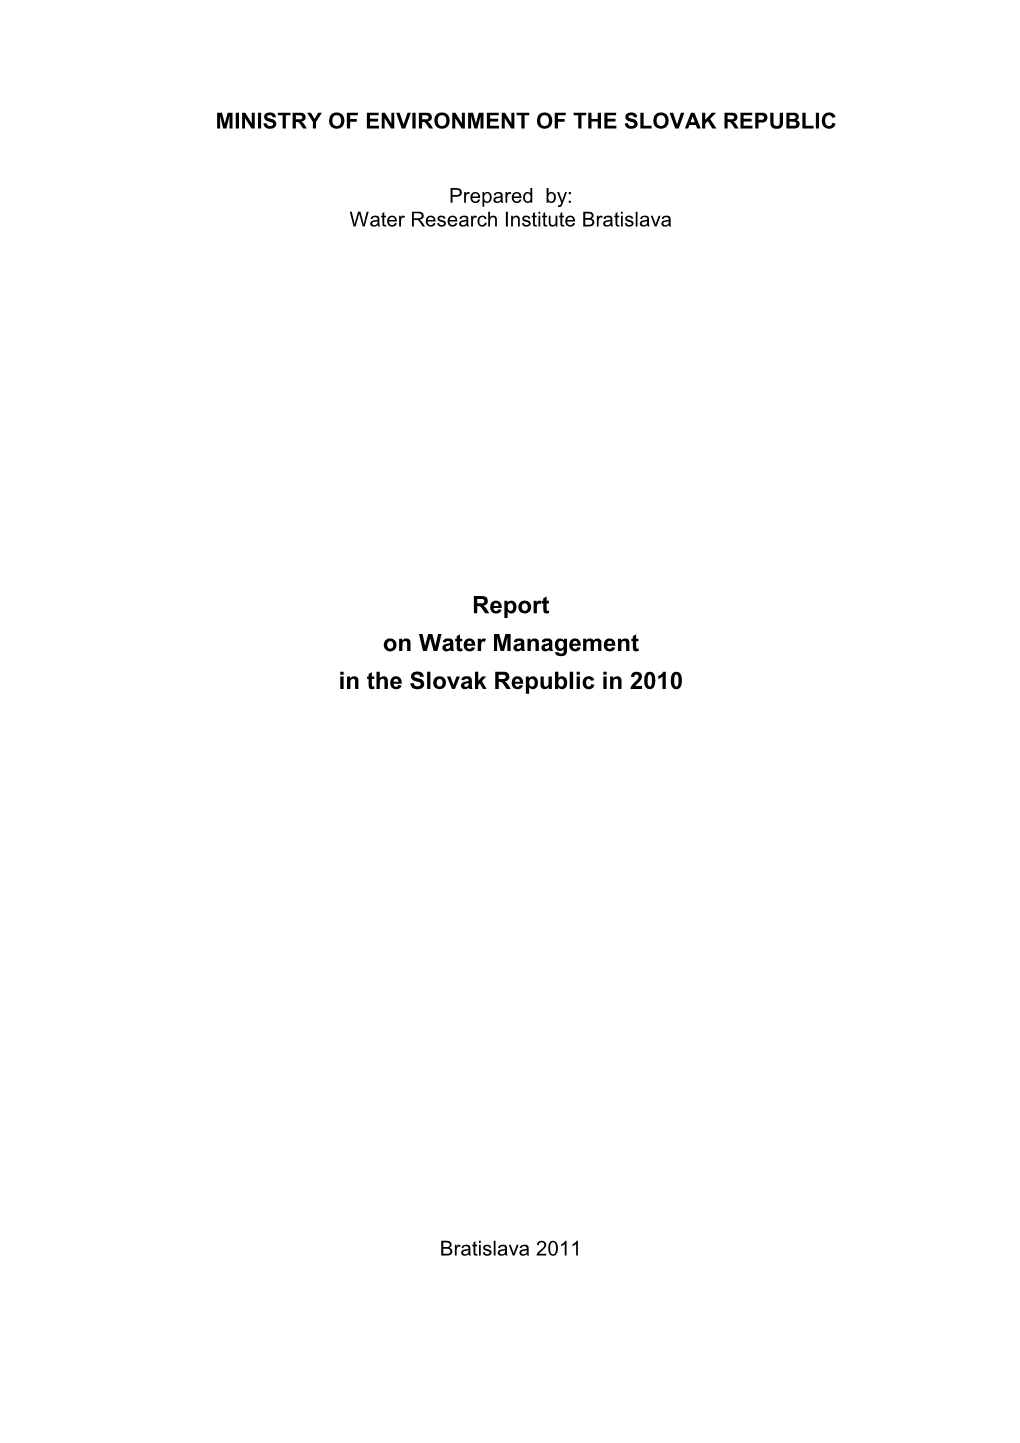 Report on Water Management in the Slovak Republic in 2010